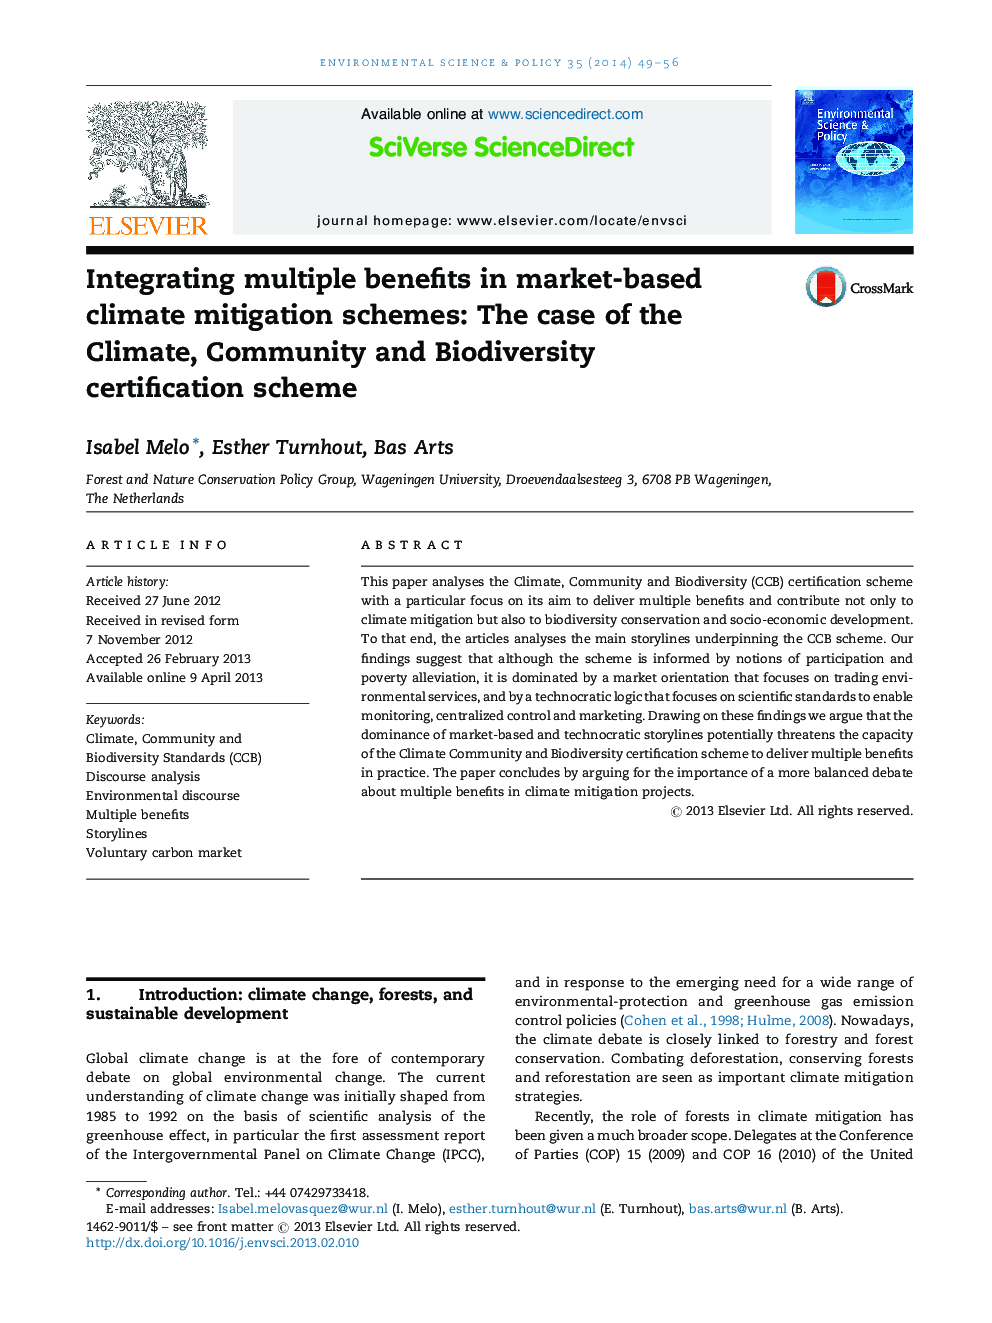 Integrating multiple benefits in market-based climate mitigation schemes: The case of the Climate, Community and Biodiversity certification scheme